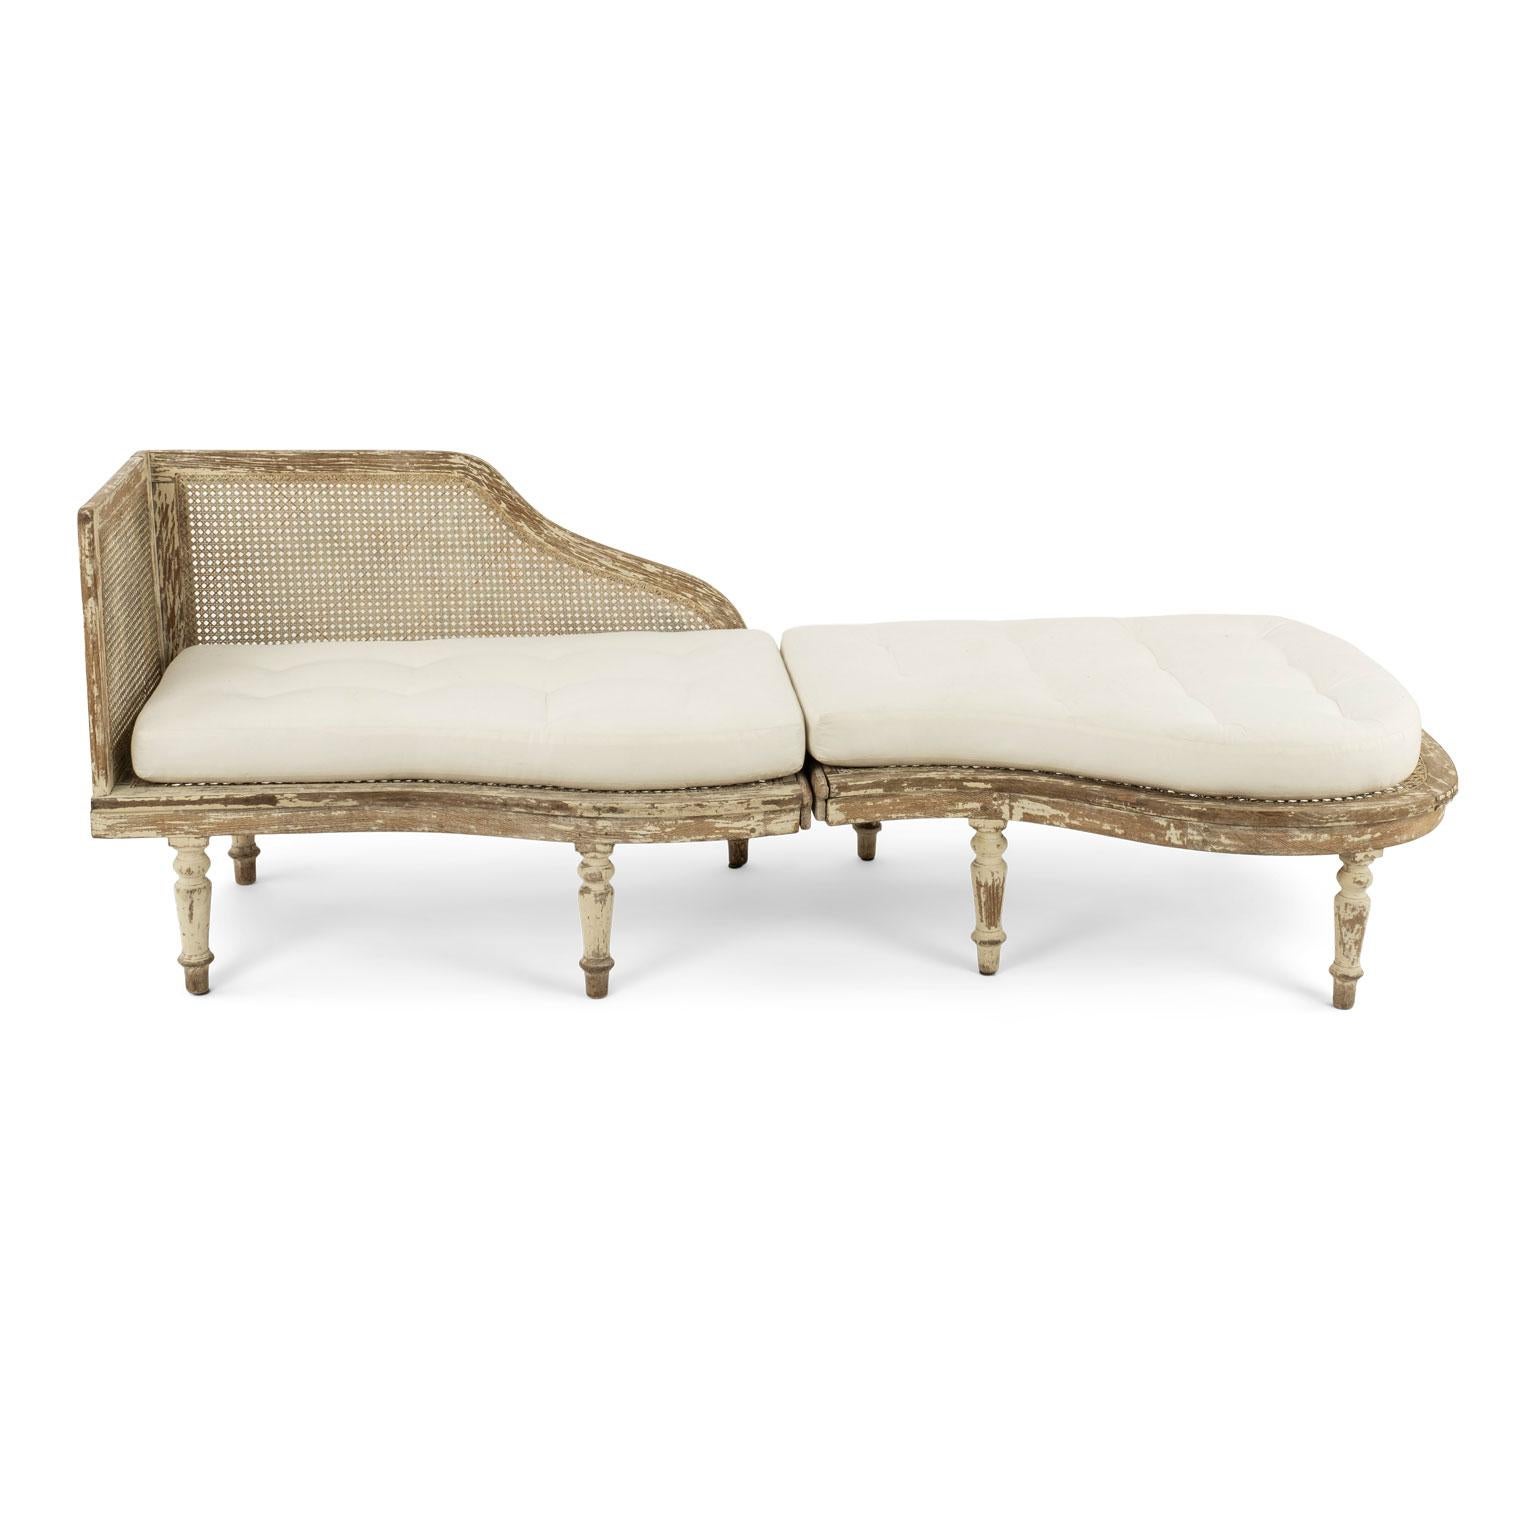 French duchesse brisée (circa 1930-1950) in light green-beige paint. Two piece chaise longue with caned seat and back. Remnants of original or early paint decorate its surface. This two-piece chaise includes newly-made tufted cushions.

Note: